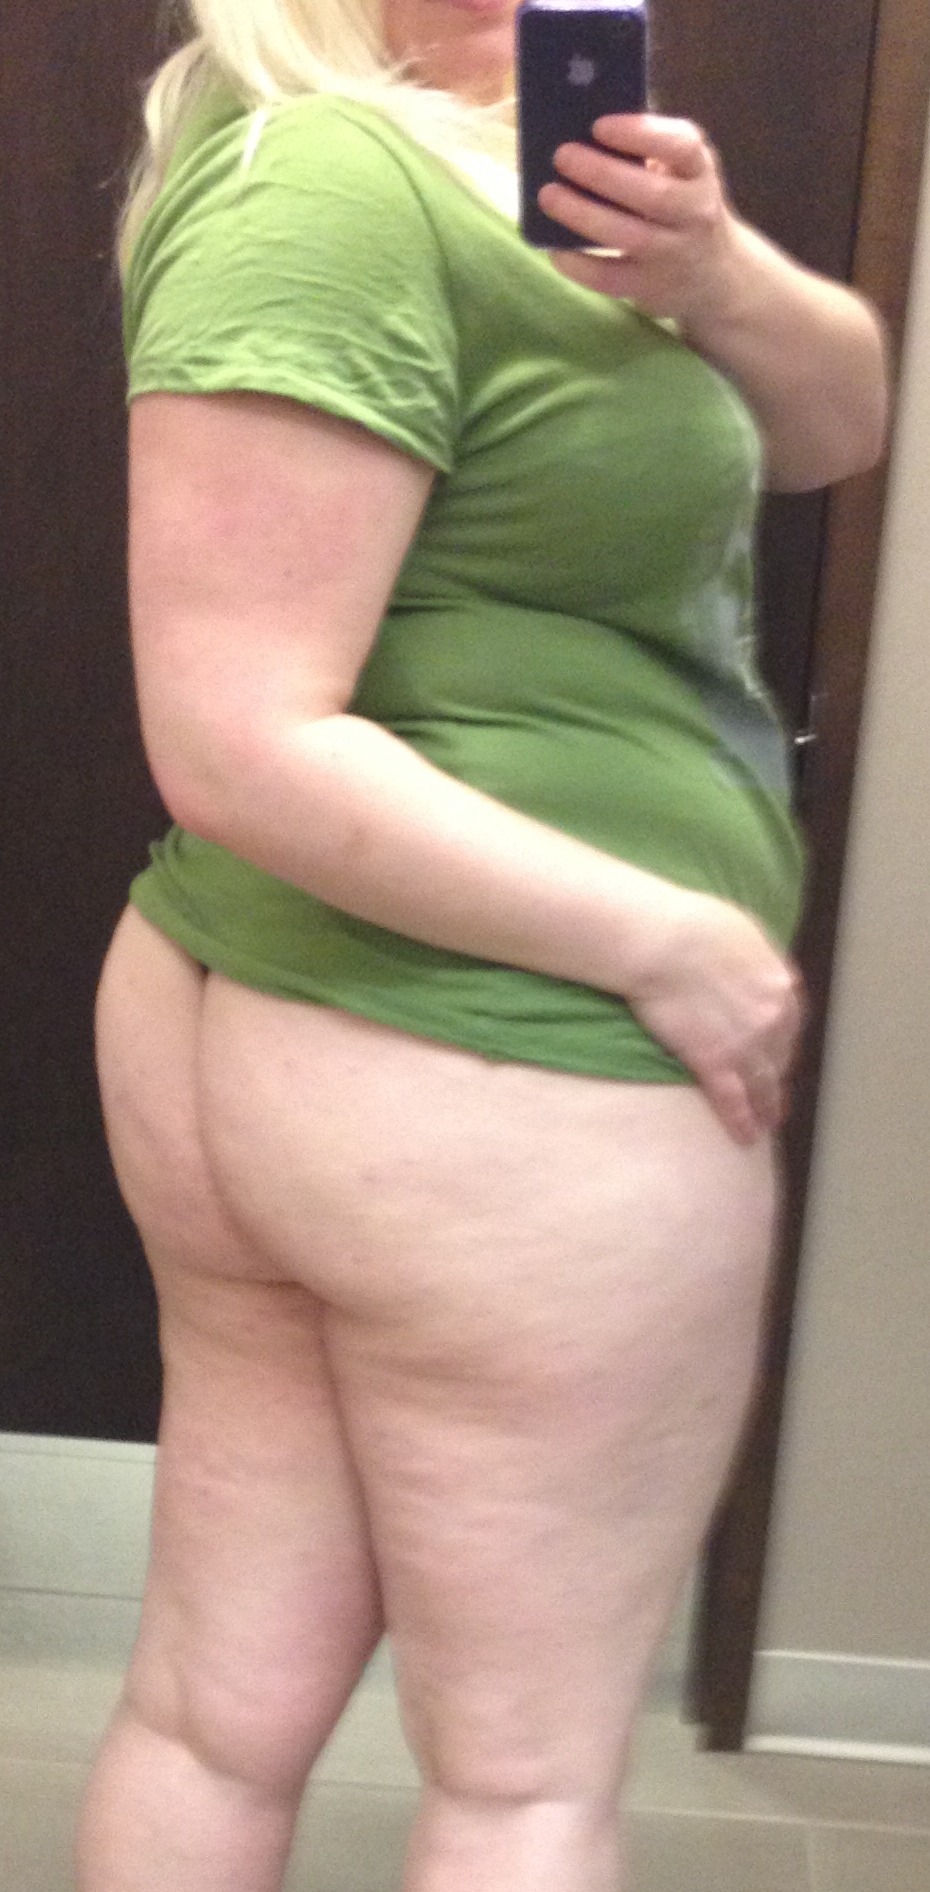 Out shopping for the day, in the change room, thought id send the Hubby a pic to